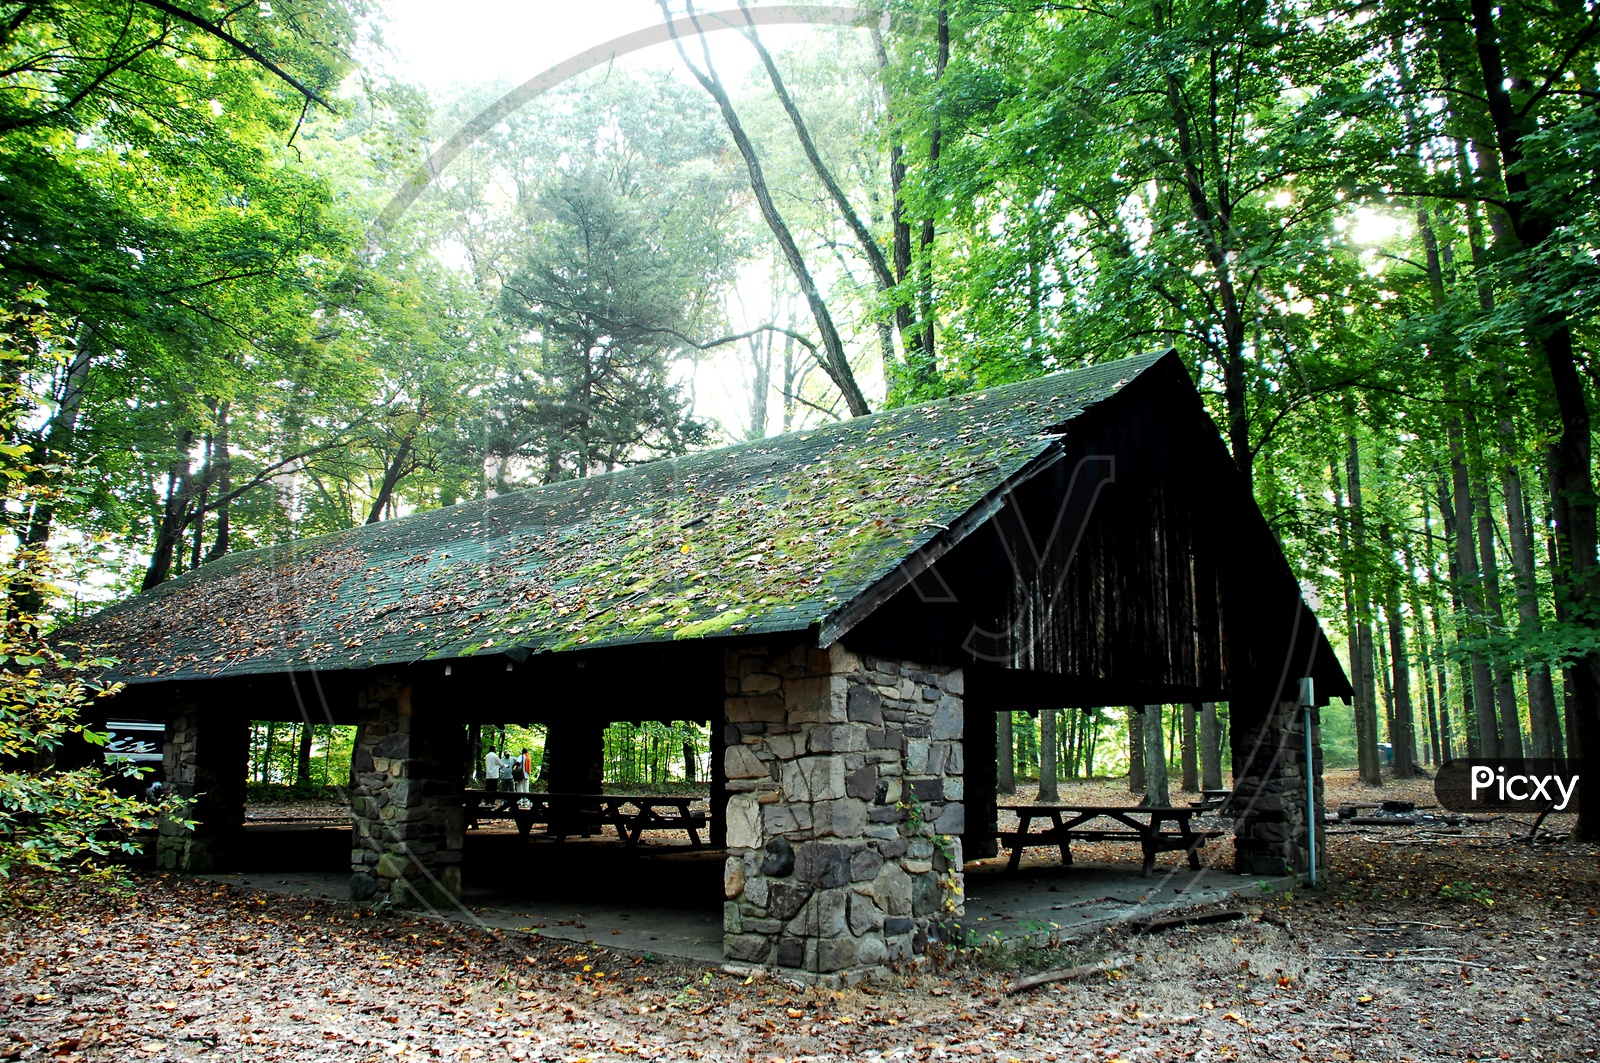 A shelter in the woods